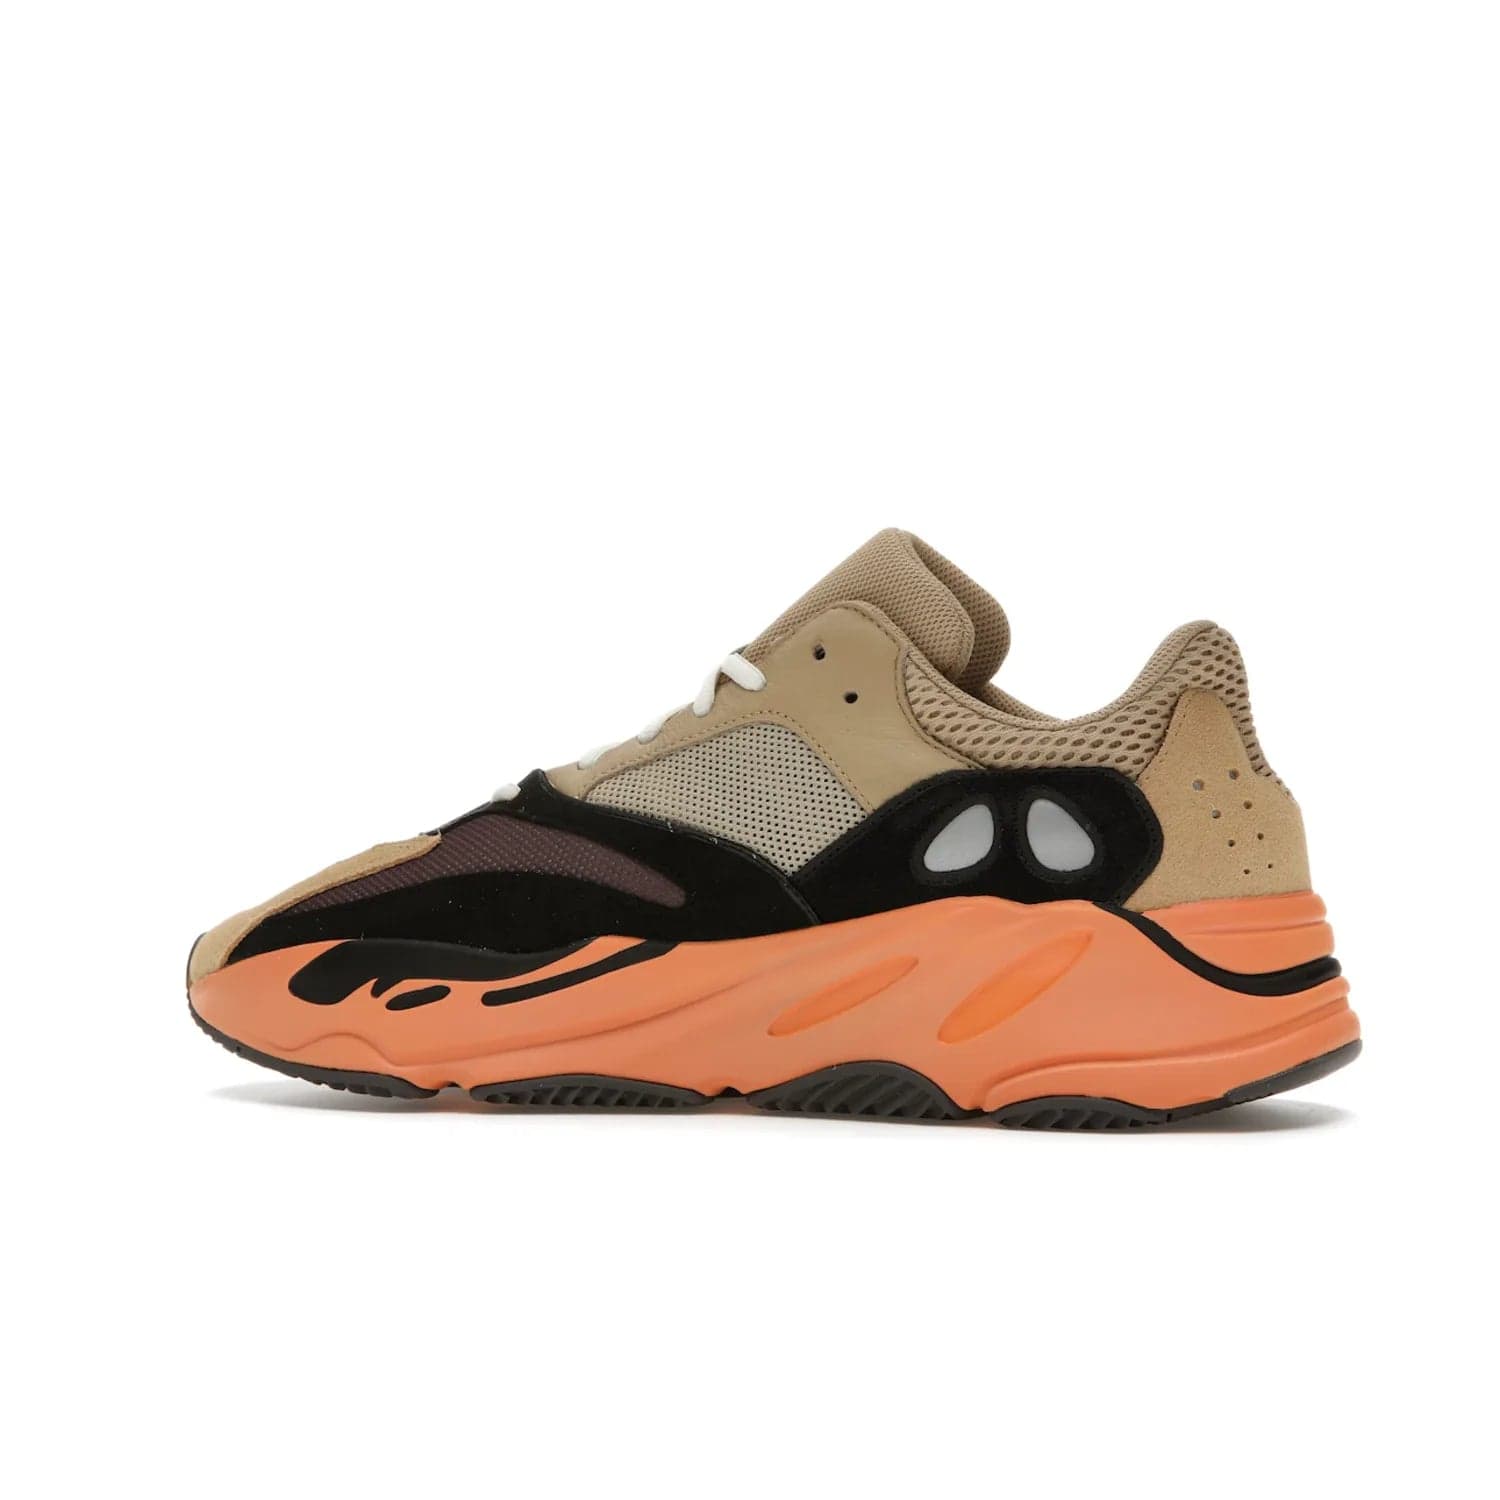 adidas Yeezy Boost 700 Enflame Amber - Image 21 - Only at www.BallersClubKickz.com - Adidas Yeezy Boost 700 Enflame Amber: Eye-catching design with pale yellow, brown, teal, and orange! Get yours in June 2021.